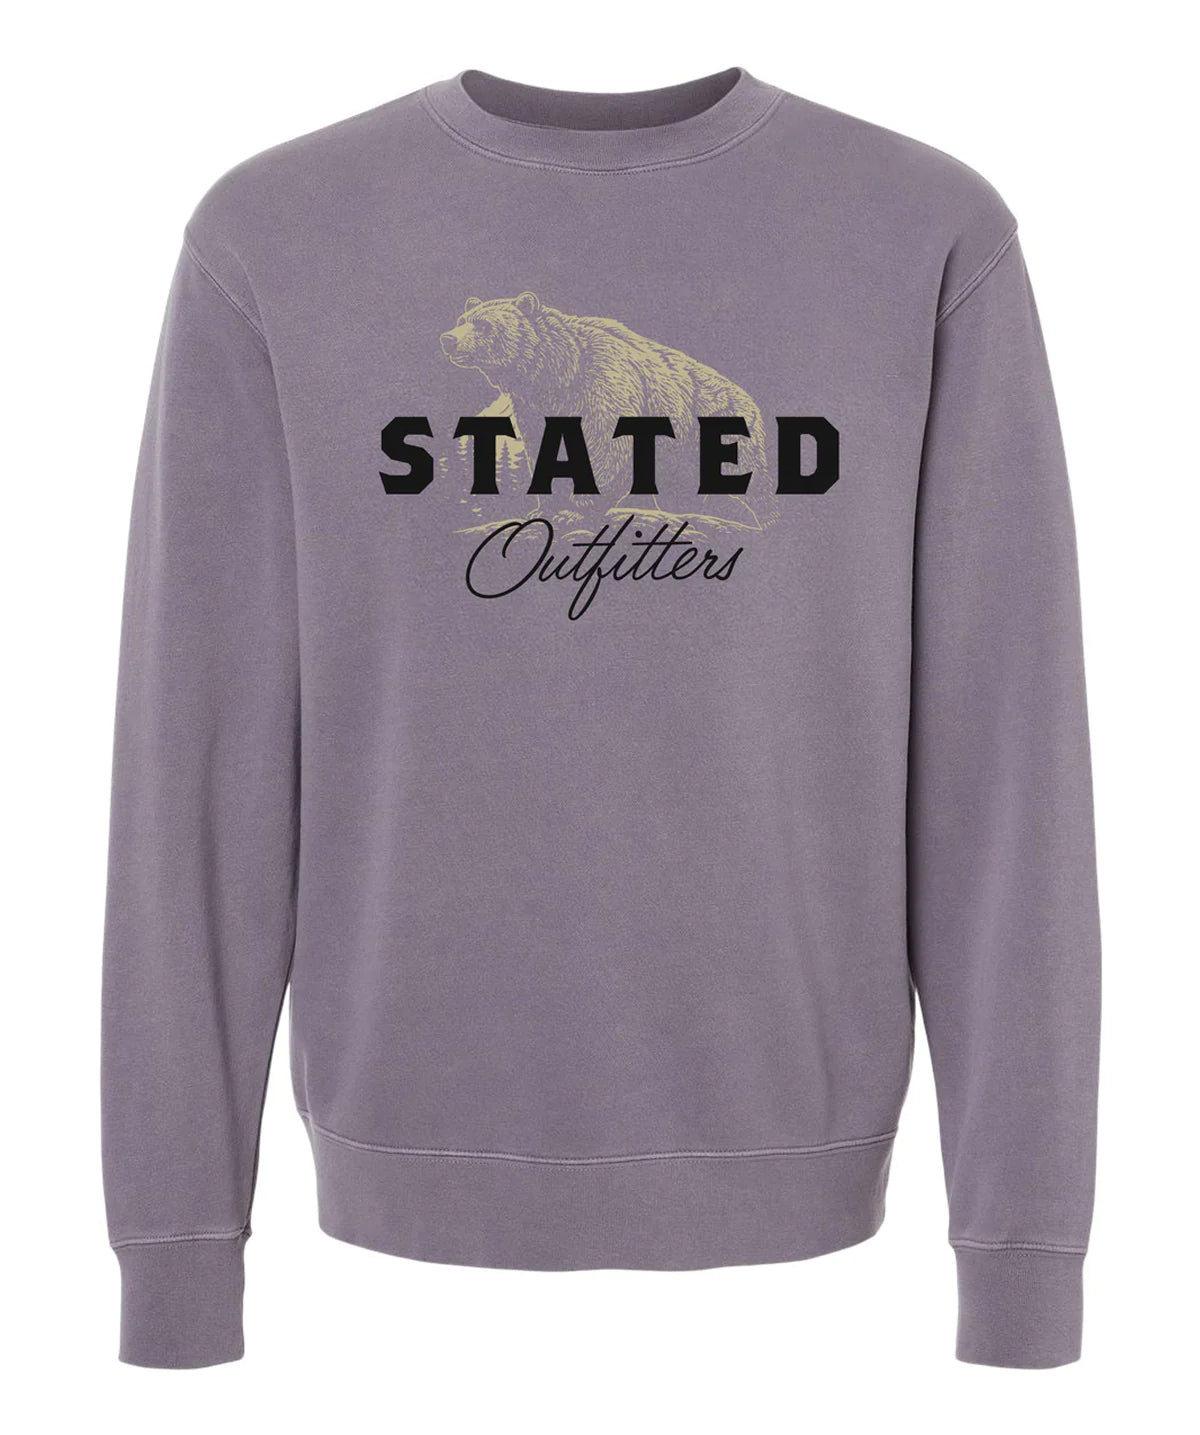 Stated Outfitters Heritage Sweatshirt